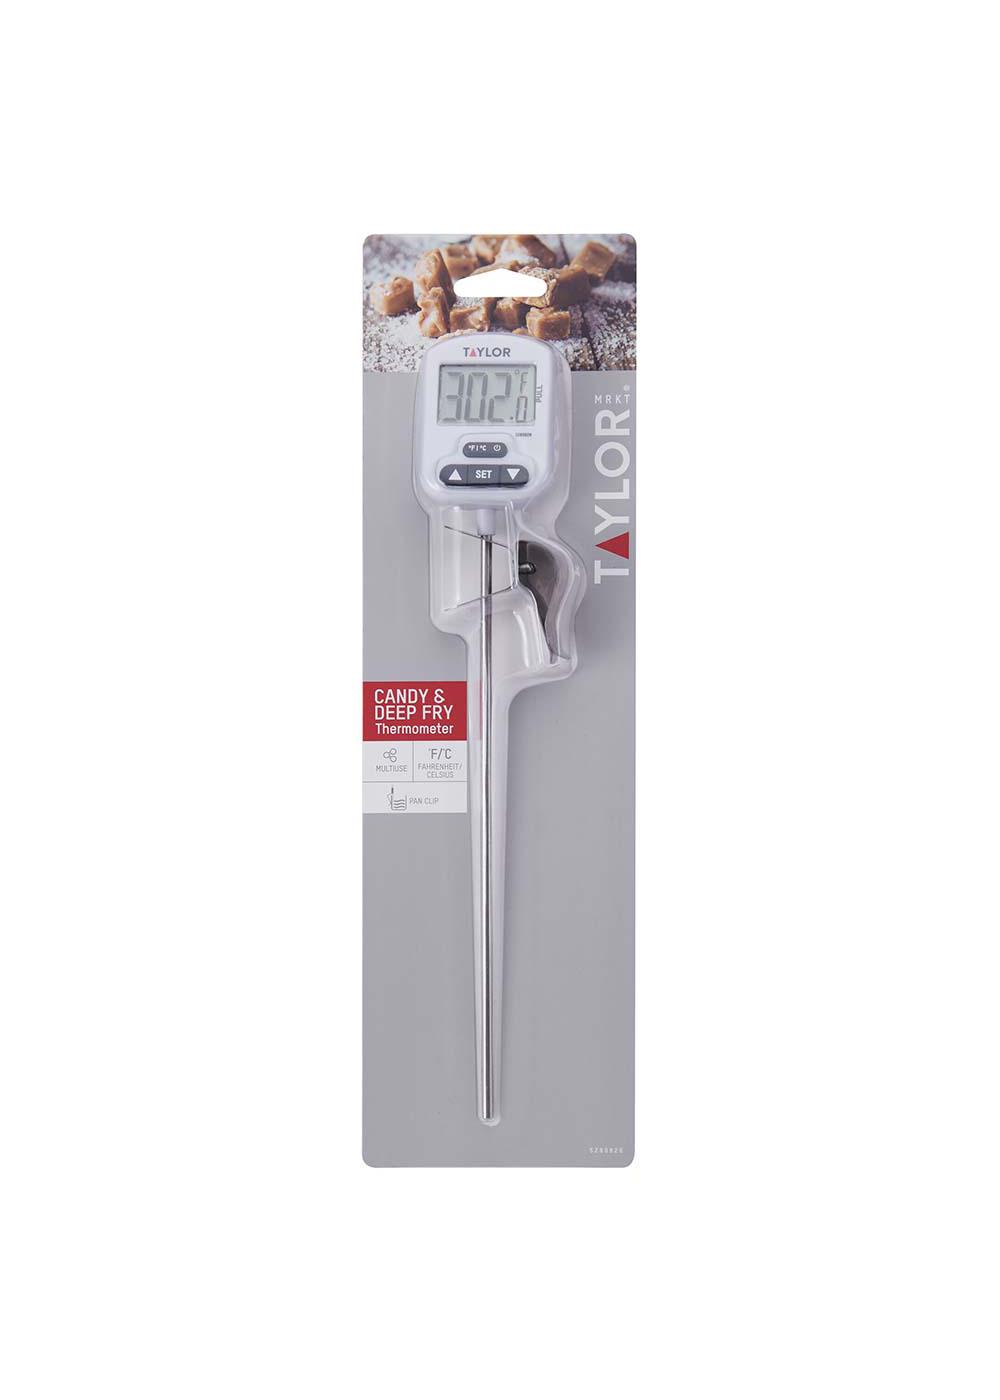 Taylor Candy & Deep Fry Thermometer; image 1 of 2